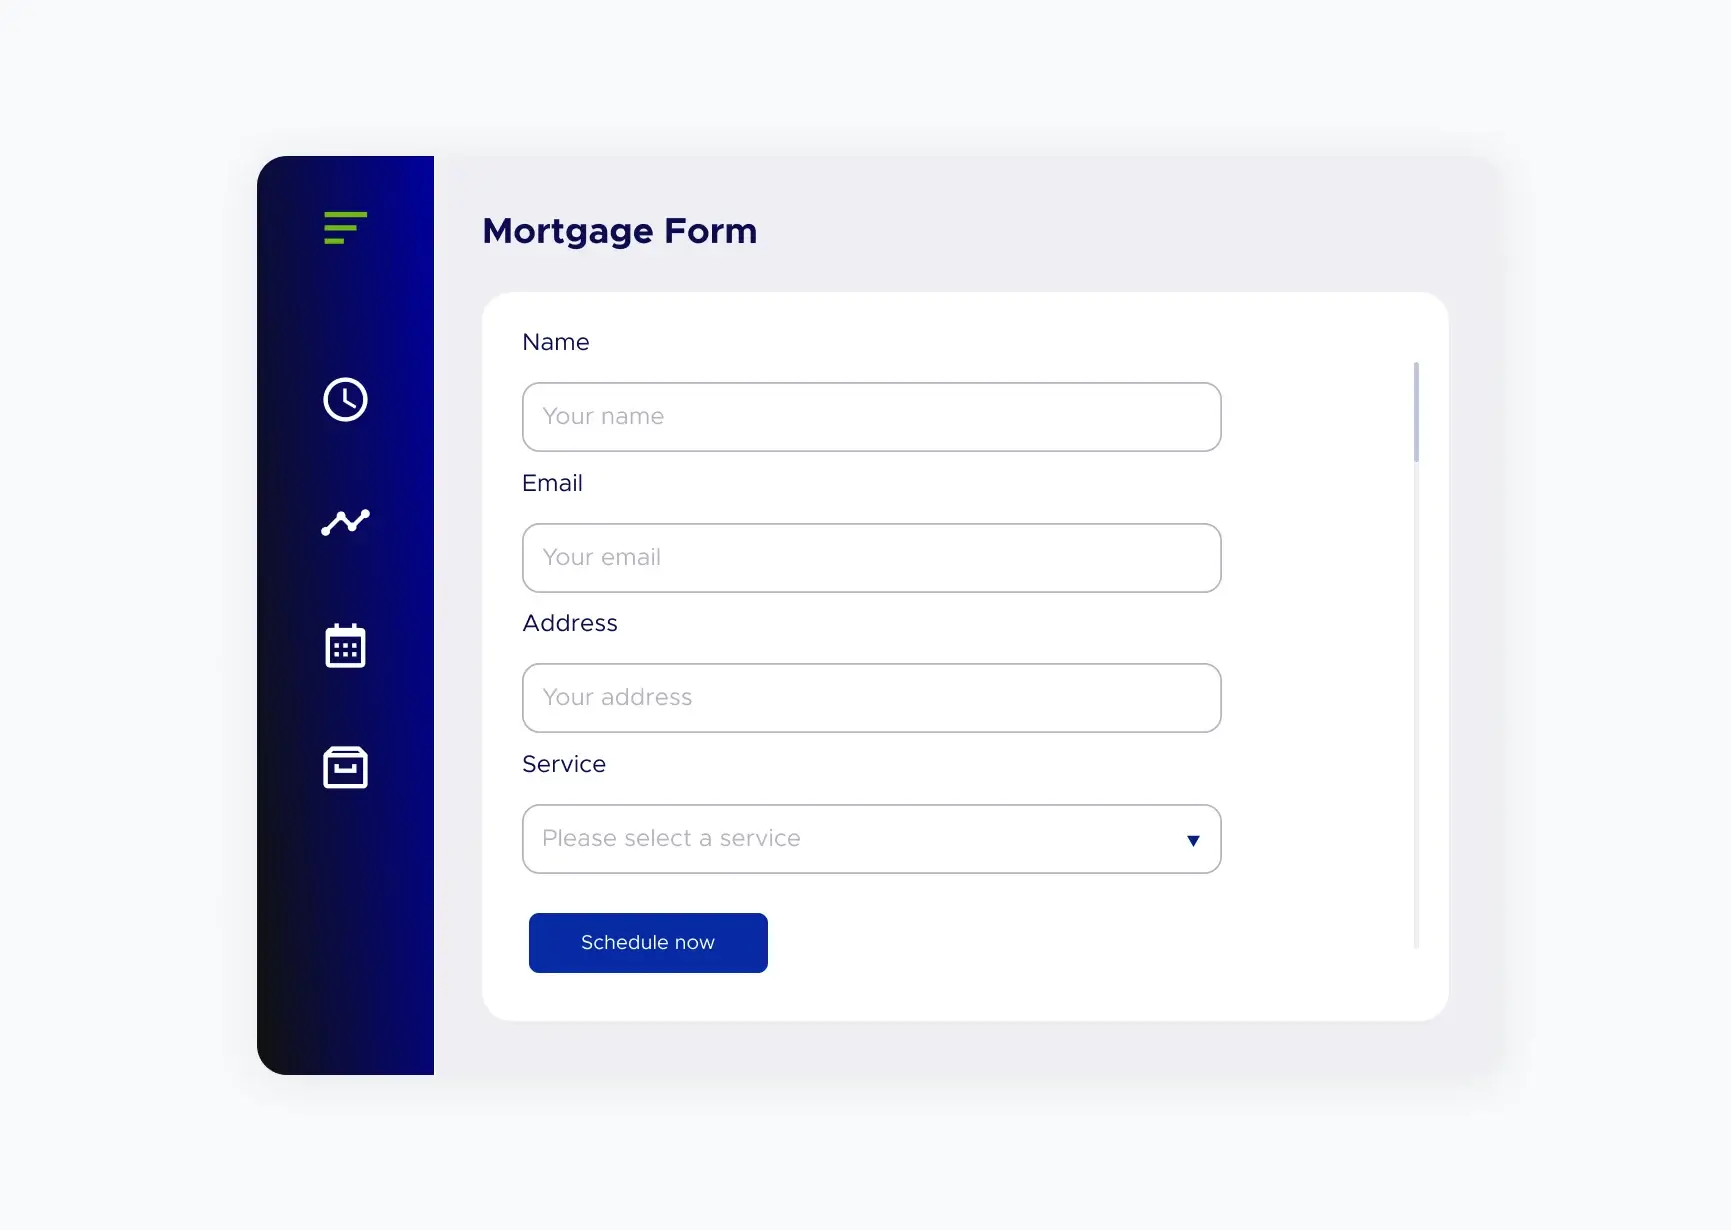 Mortgage Form within the ACF Technologies application